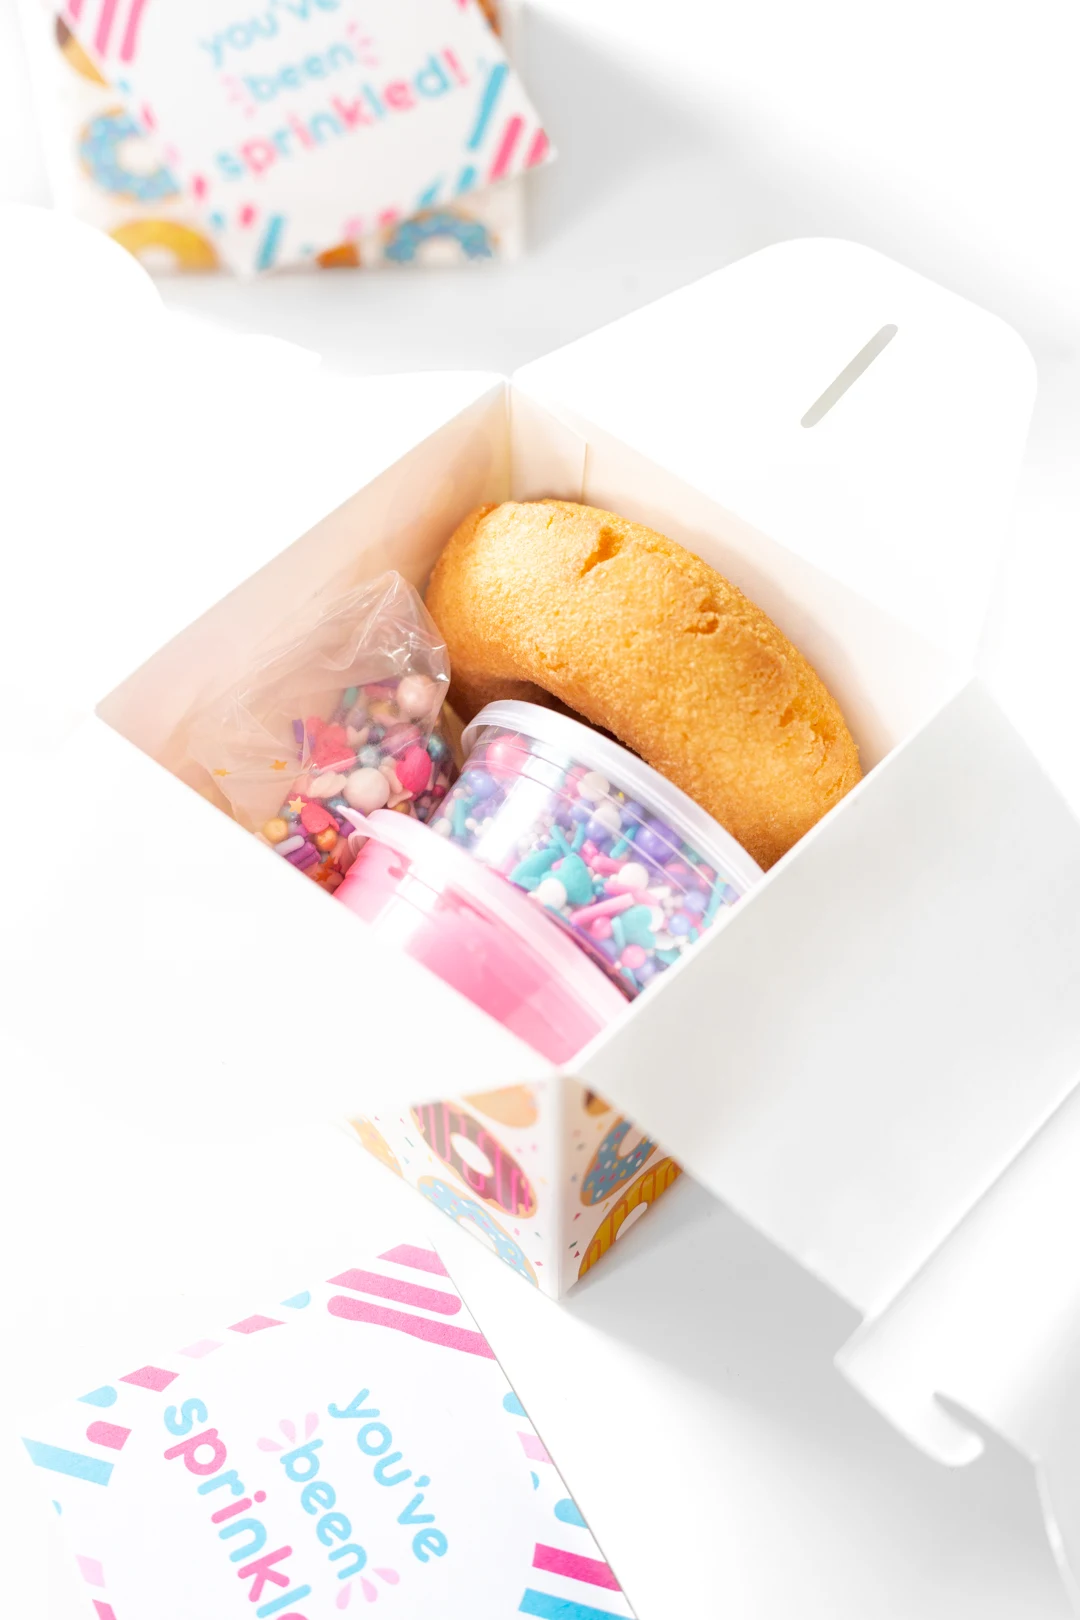 tiny donut decorating kit with containers of sprinkles and icing and a plain donut.